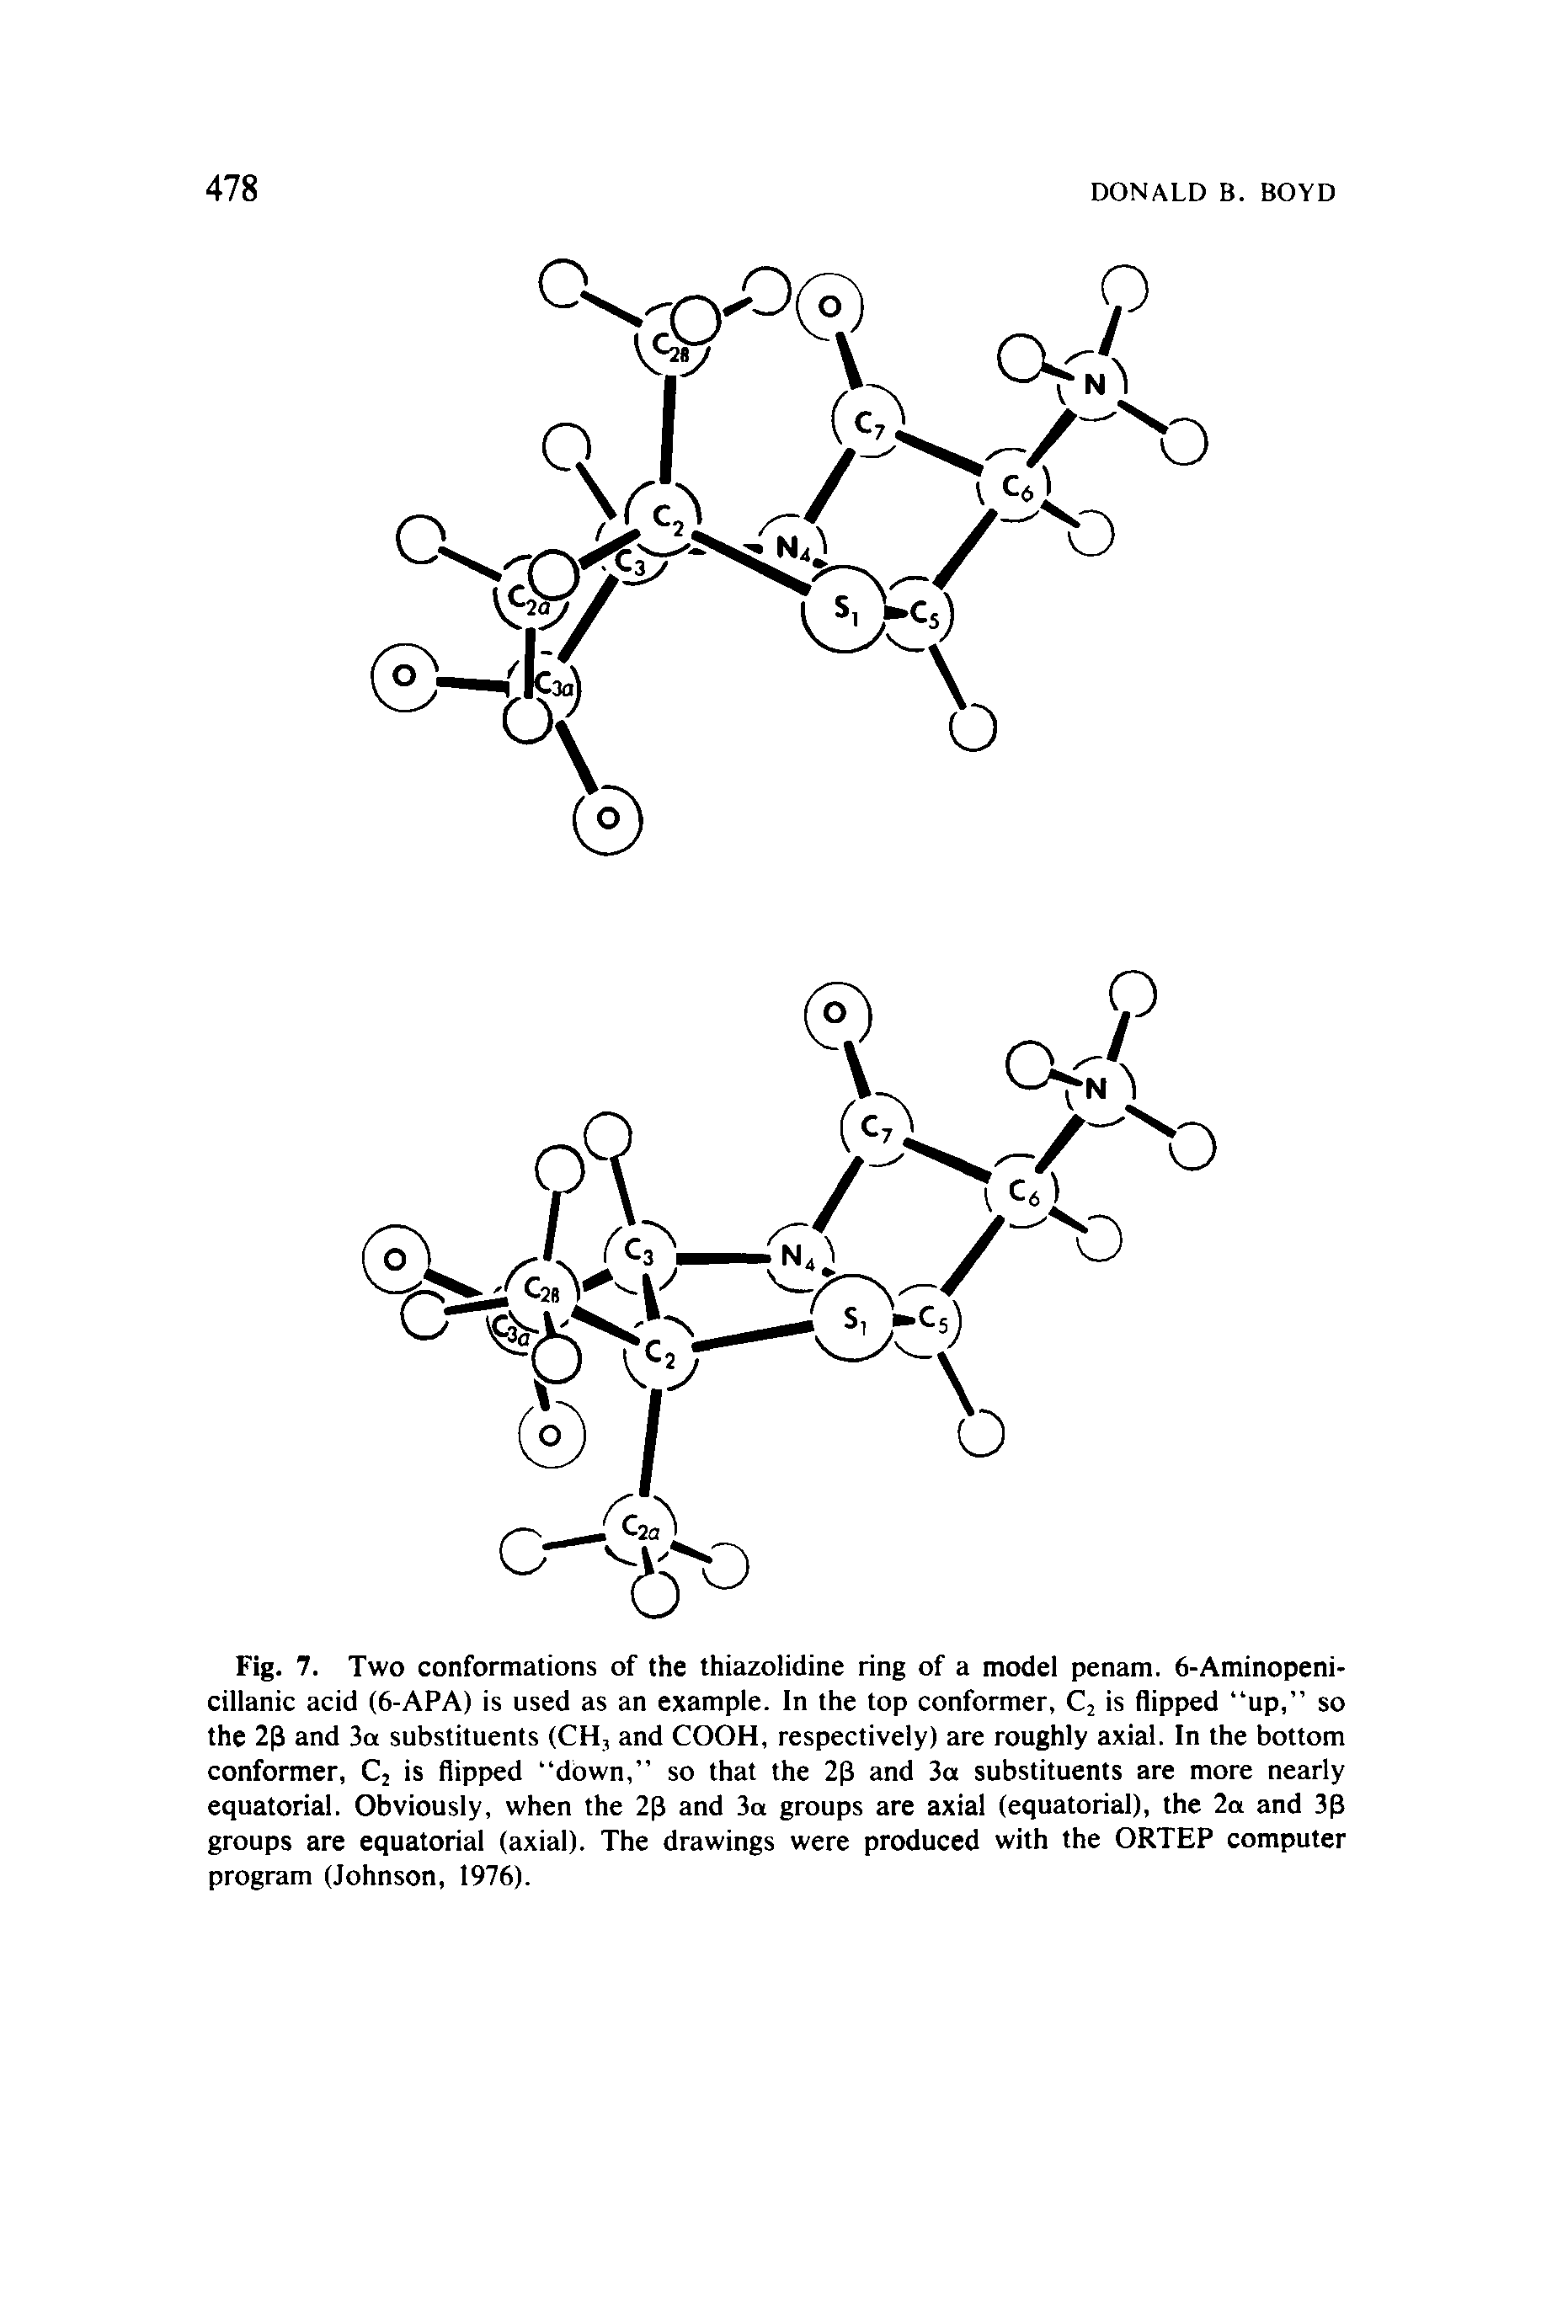 Fig. 7. Two conformations of the thiazolidine ring of a model penam. 6-Aminopeni-cillanic acid (6-APA) is used as an example. In the top conformer, Cj is flipped up, so the 2p and 3a substituents (CH, and COOH, respectively) are roughly axial. In the bottom conformer, Cj is flipped down, so that the 2(3 and 3a substituents are more nearly equatorial. Obviously, when the 2 and 3a groups are axial (equatorial), the 2a and 3p groups are equatorial (axial). The drawings were produced with the ORTEP computer program (Johnson, 1976).